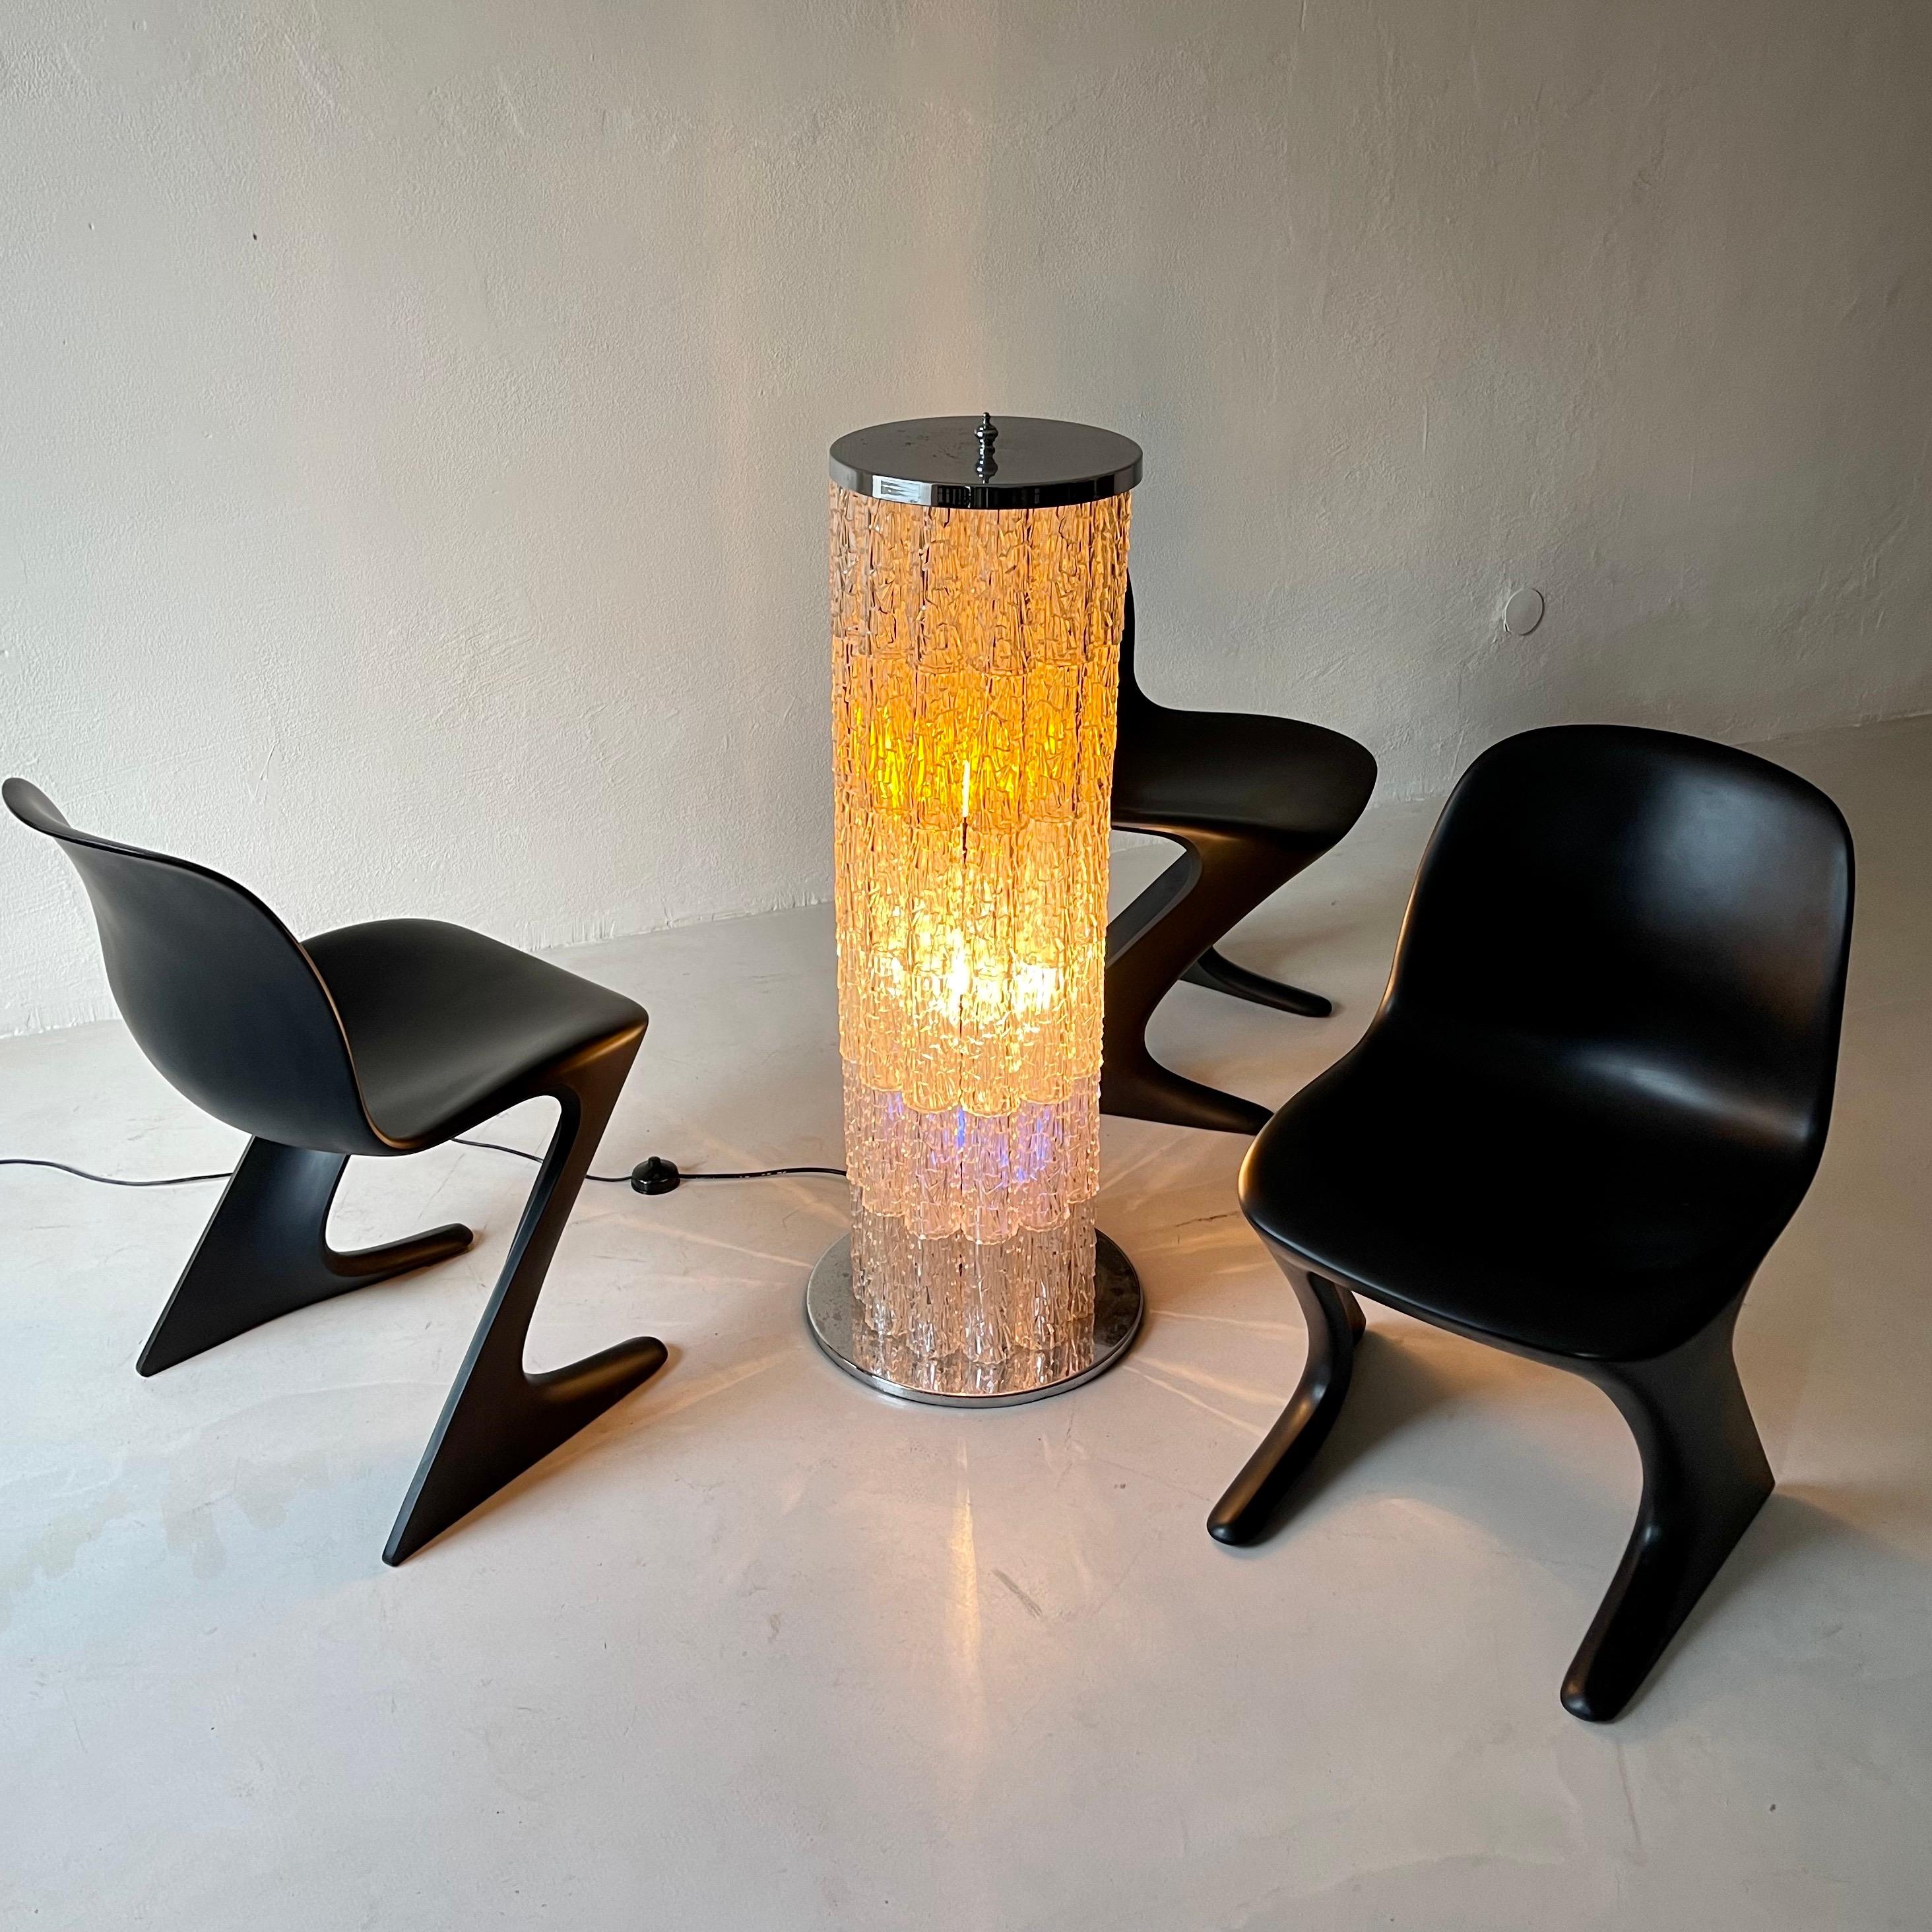 Lucite Floor Lamp, Italy, 1970s For Sale 1